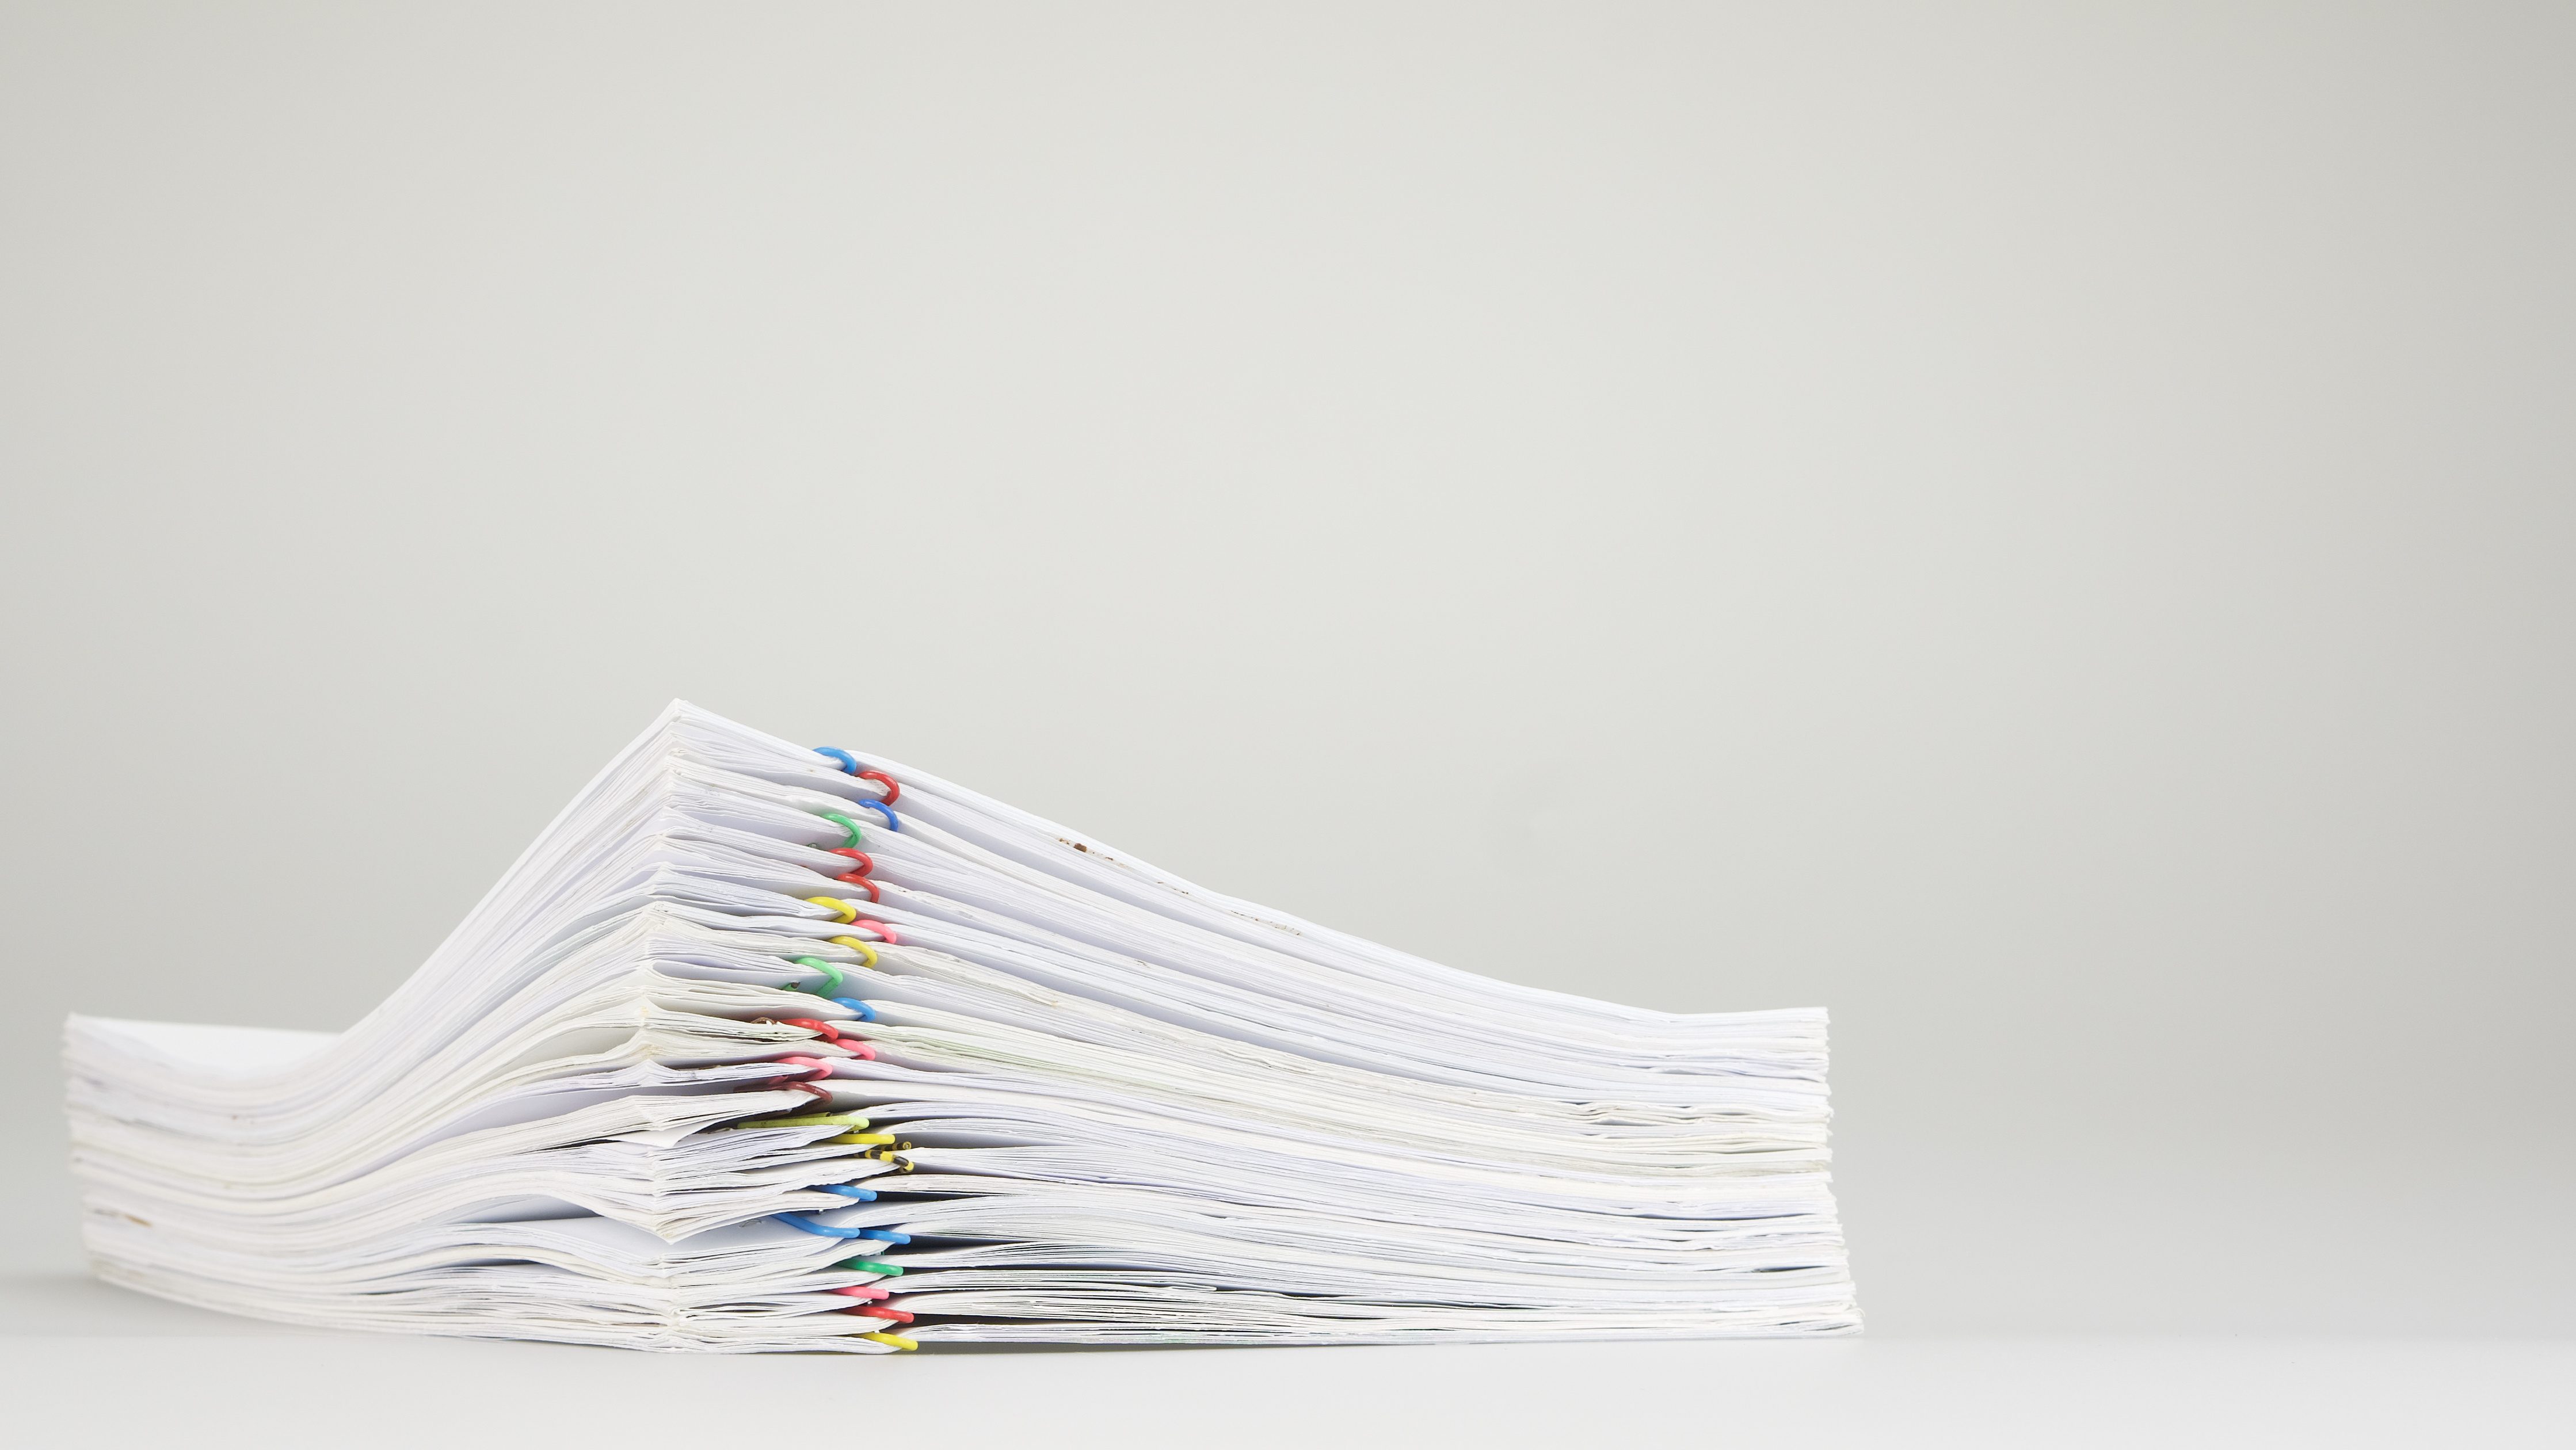 Pile overload of paper with colorful paper clip place on white background.